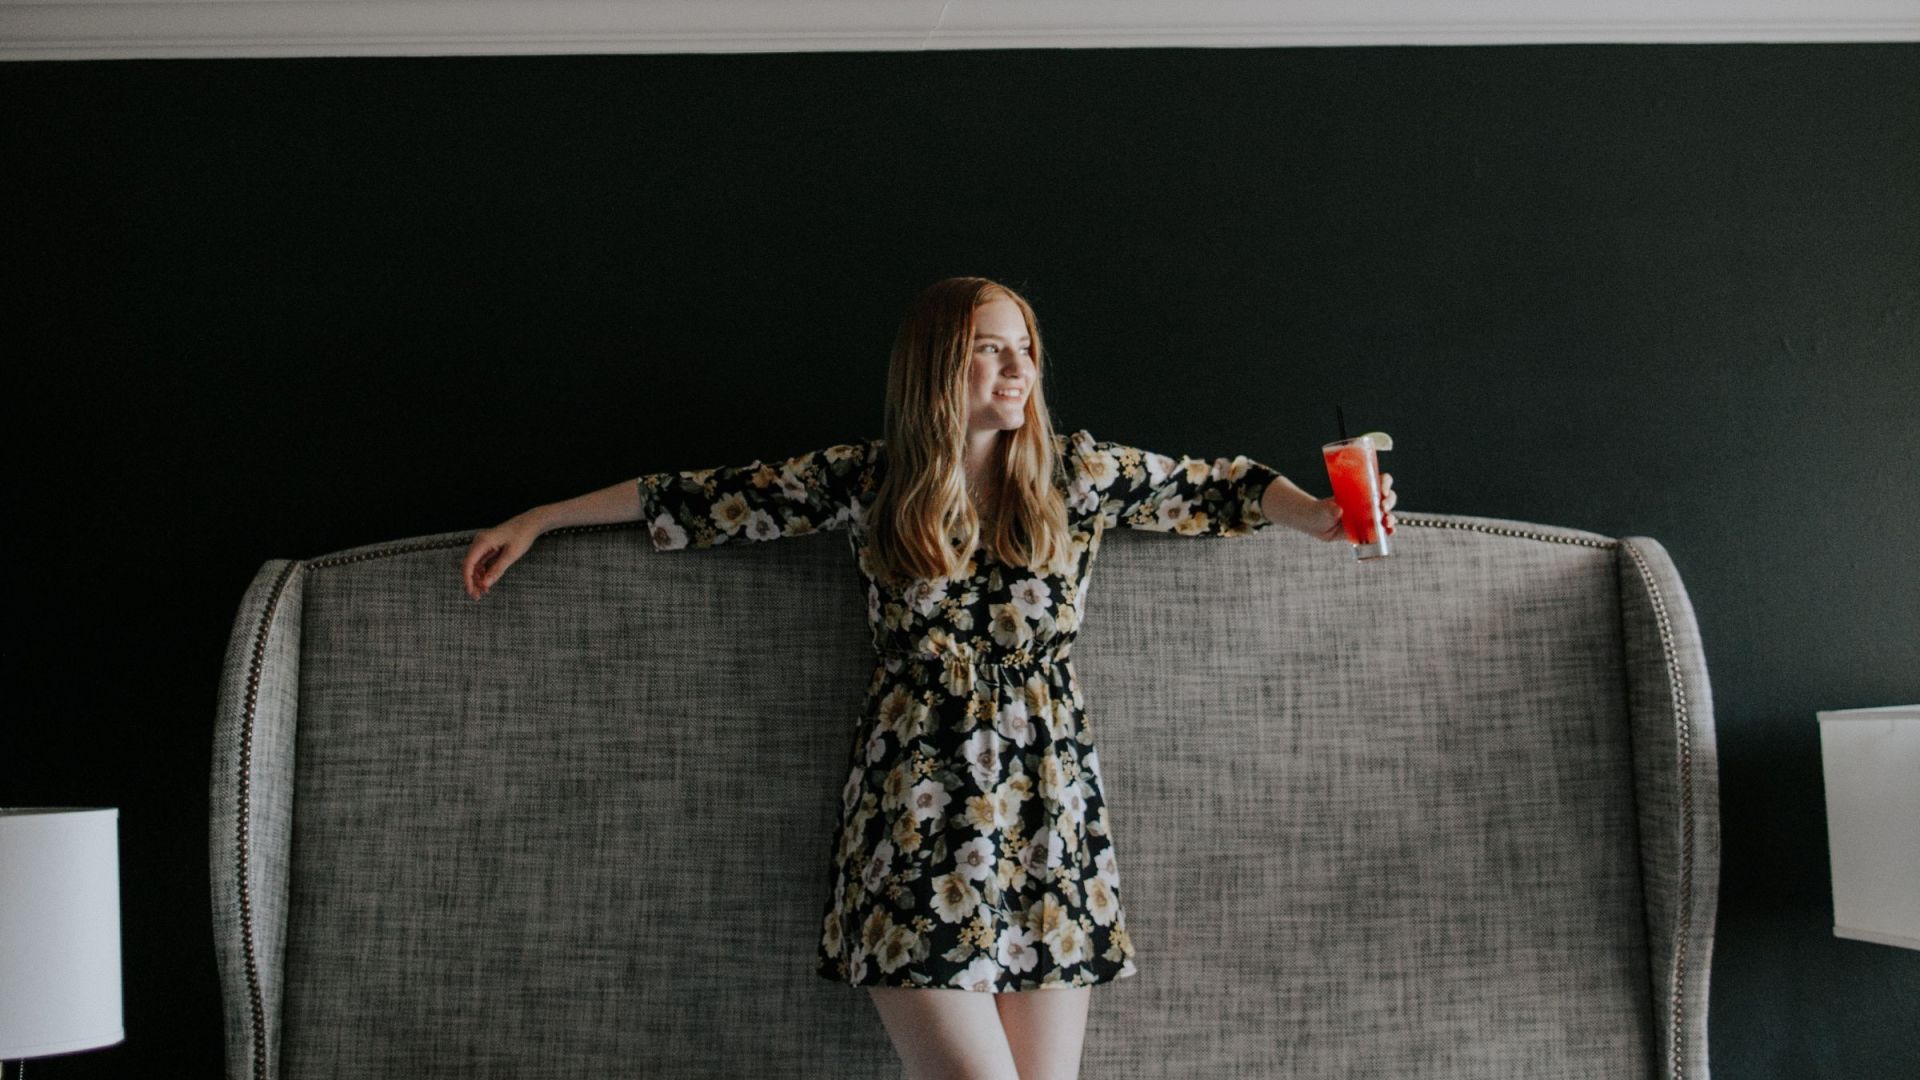 A Person In A Dress Holding A Red Cup And Standing On A Couch